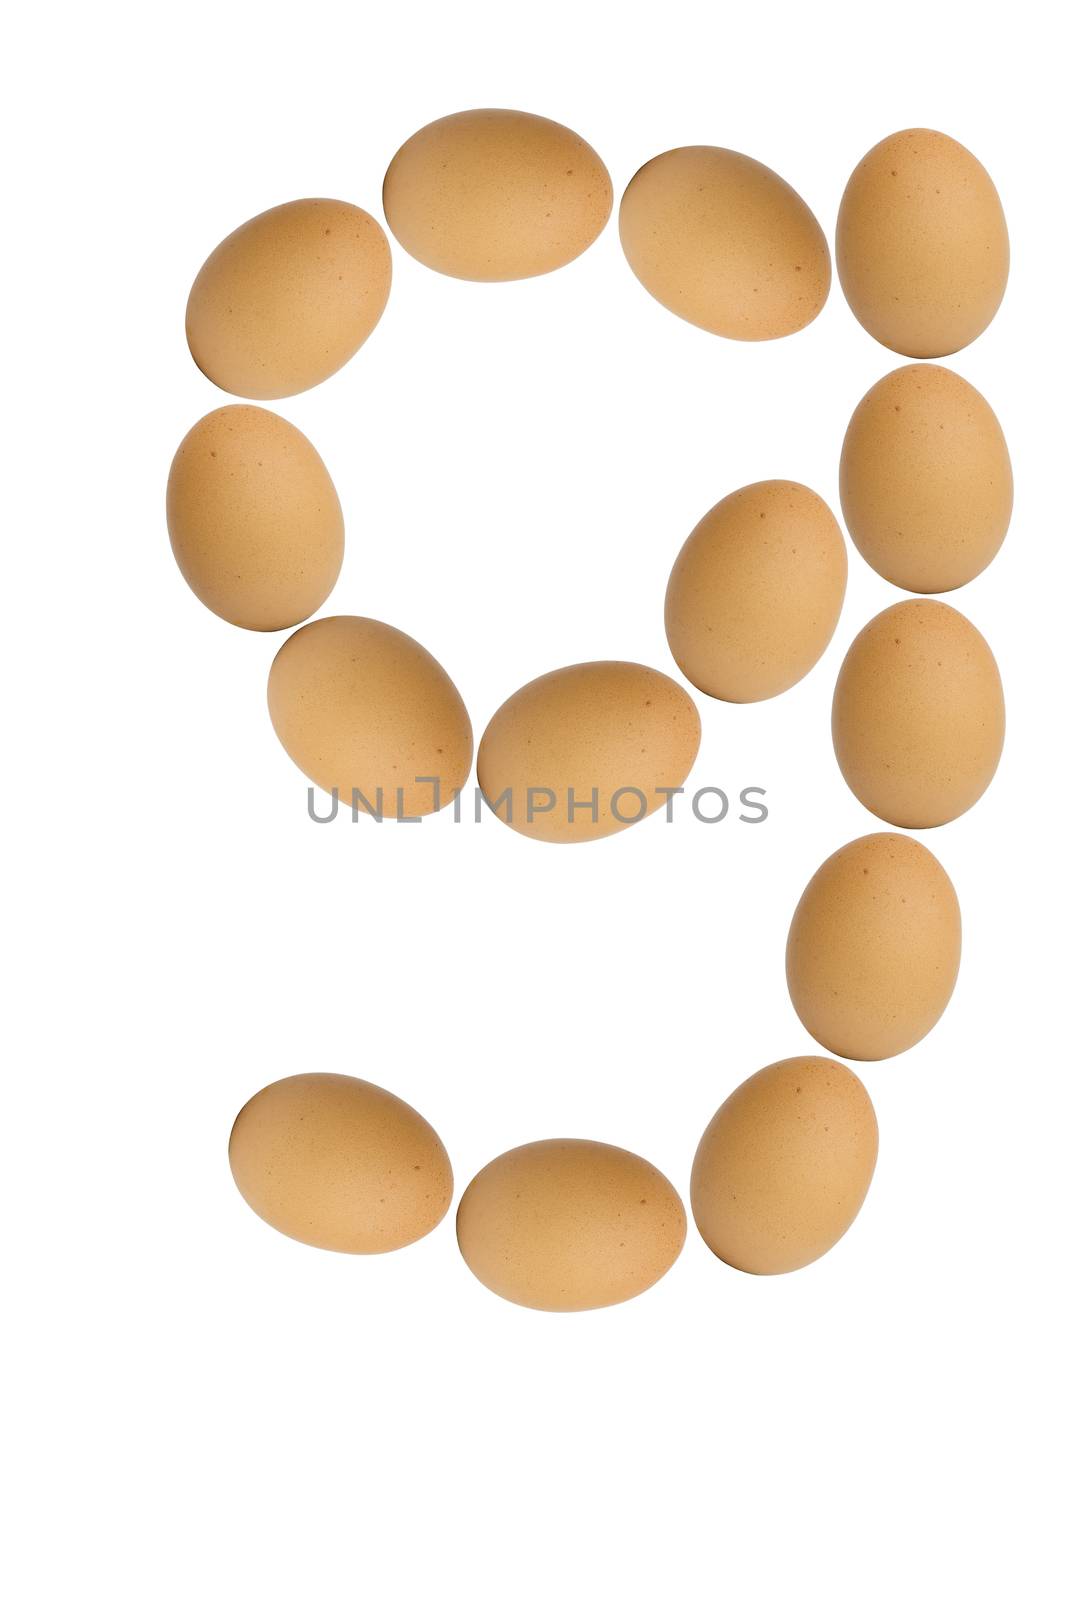 Alphabets  A to Z from brown eggs alphabet isolated on white background, g